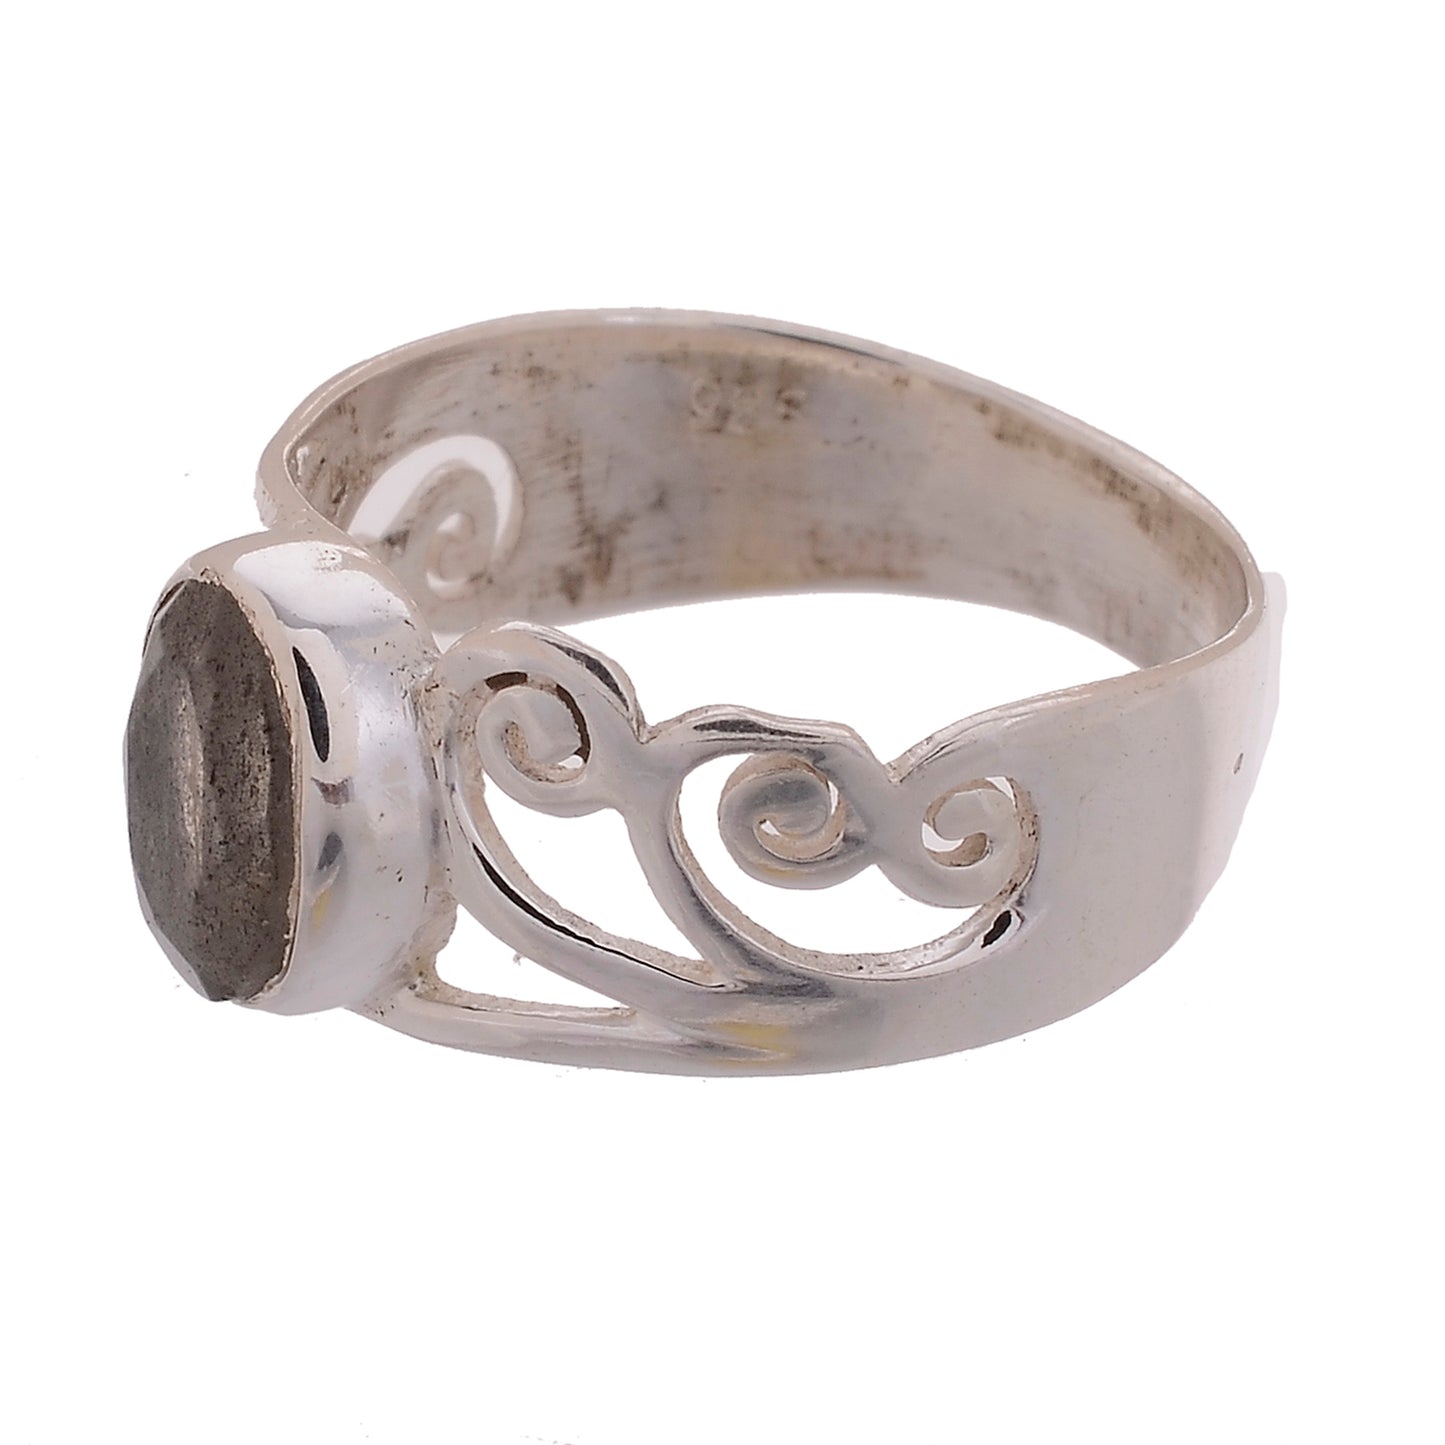 Jayli Hand Cut Spiral Ring-Available in 15 Stones